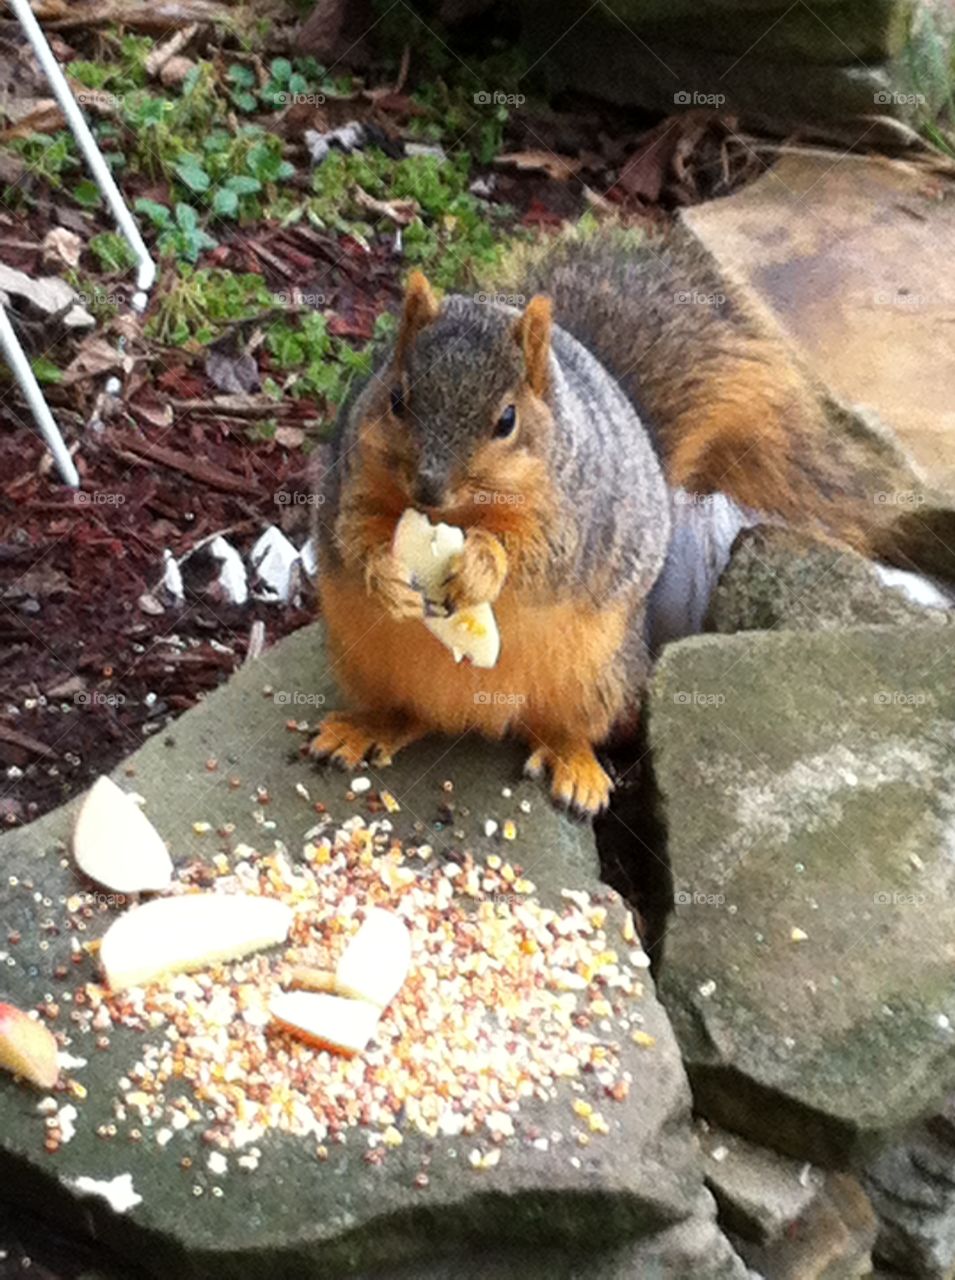 Squirrel. A squirrel eating an apple slices I put out for him in my garden. 